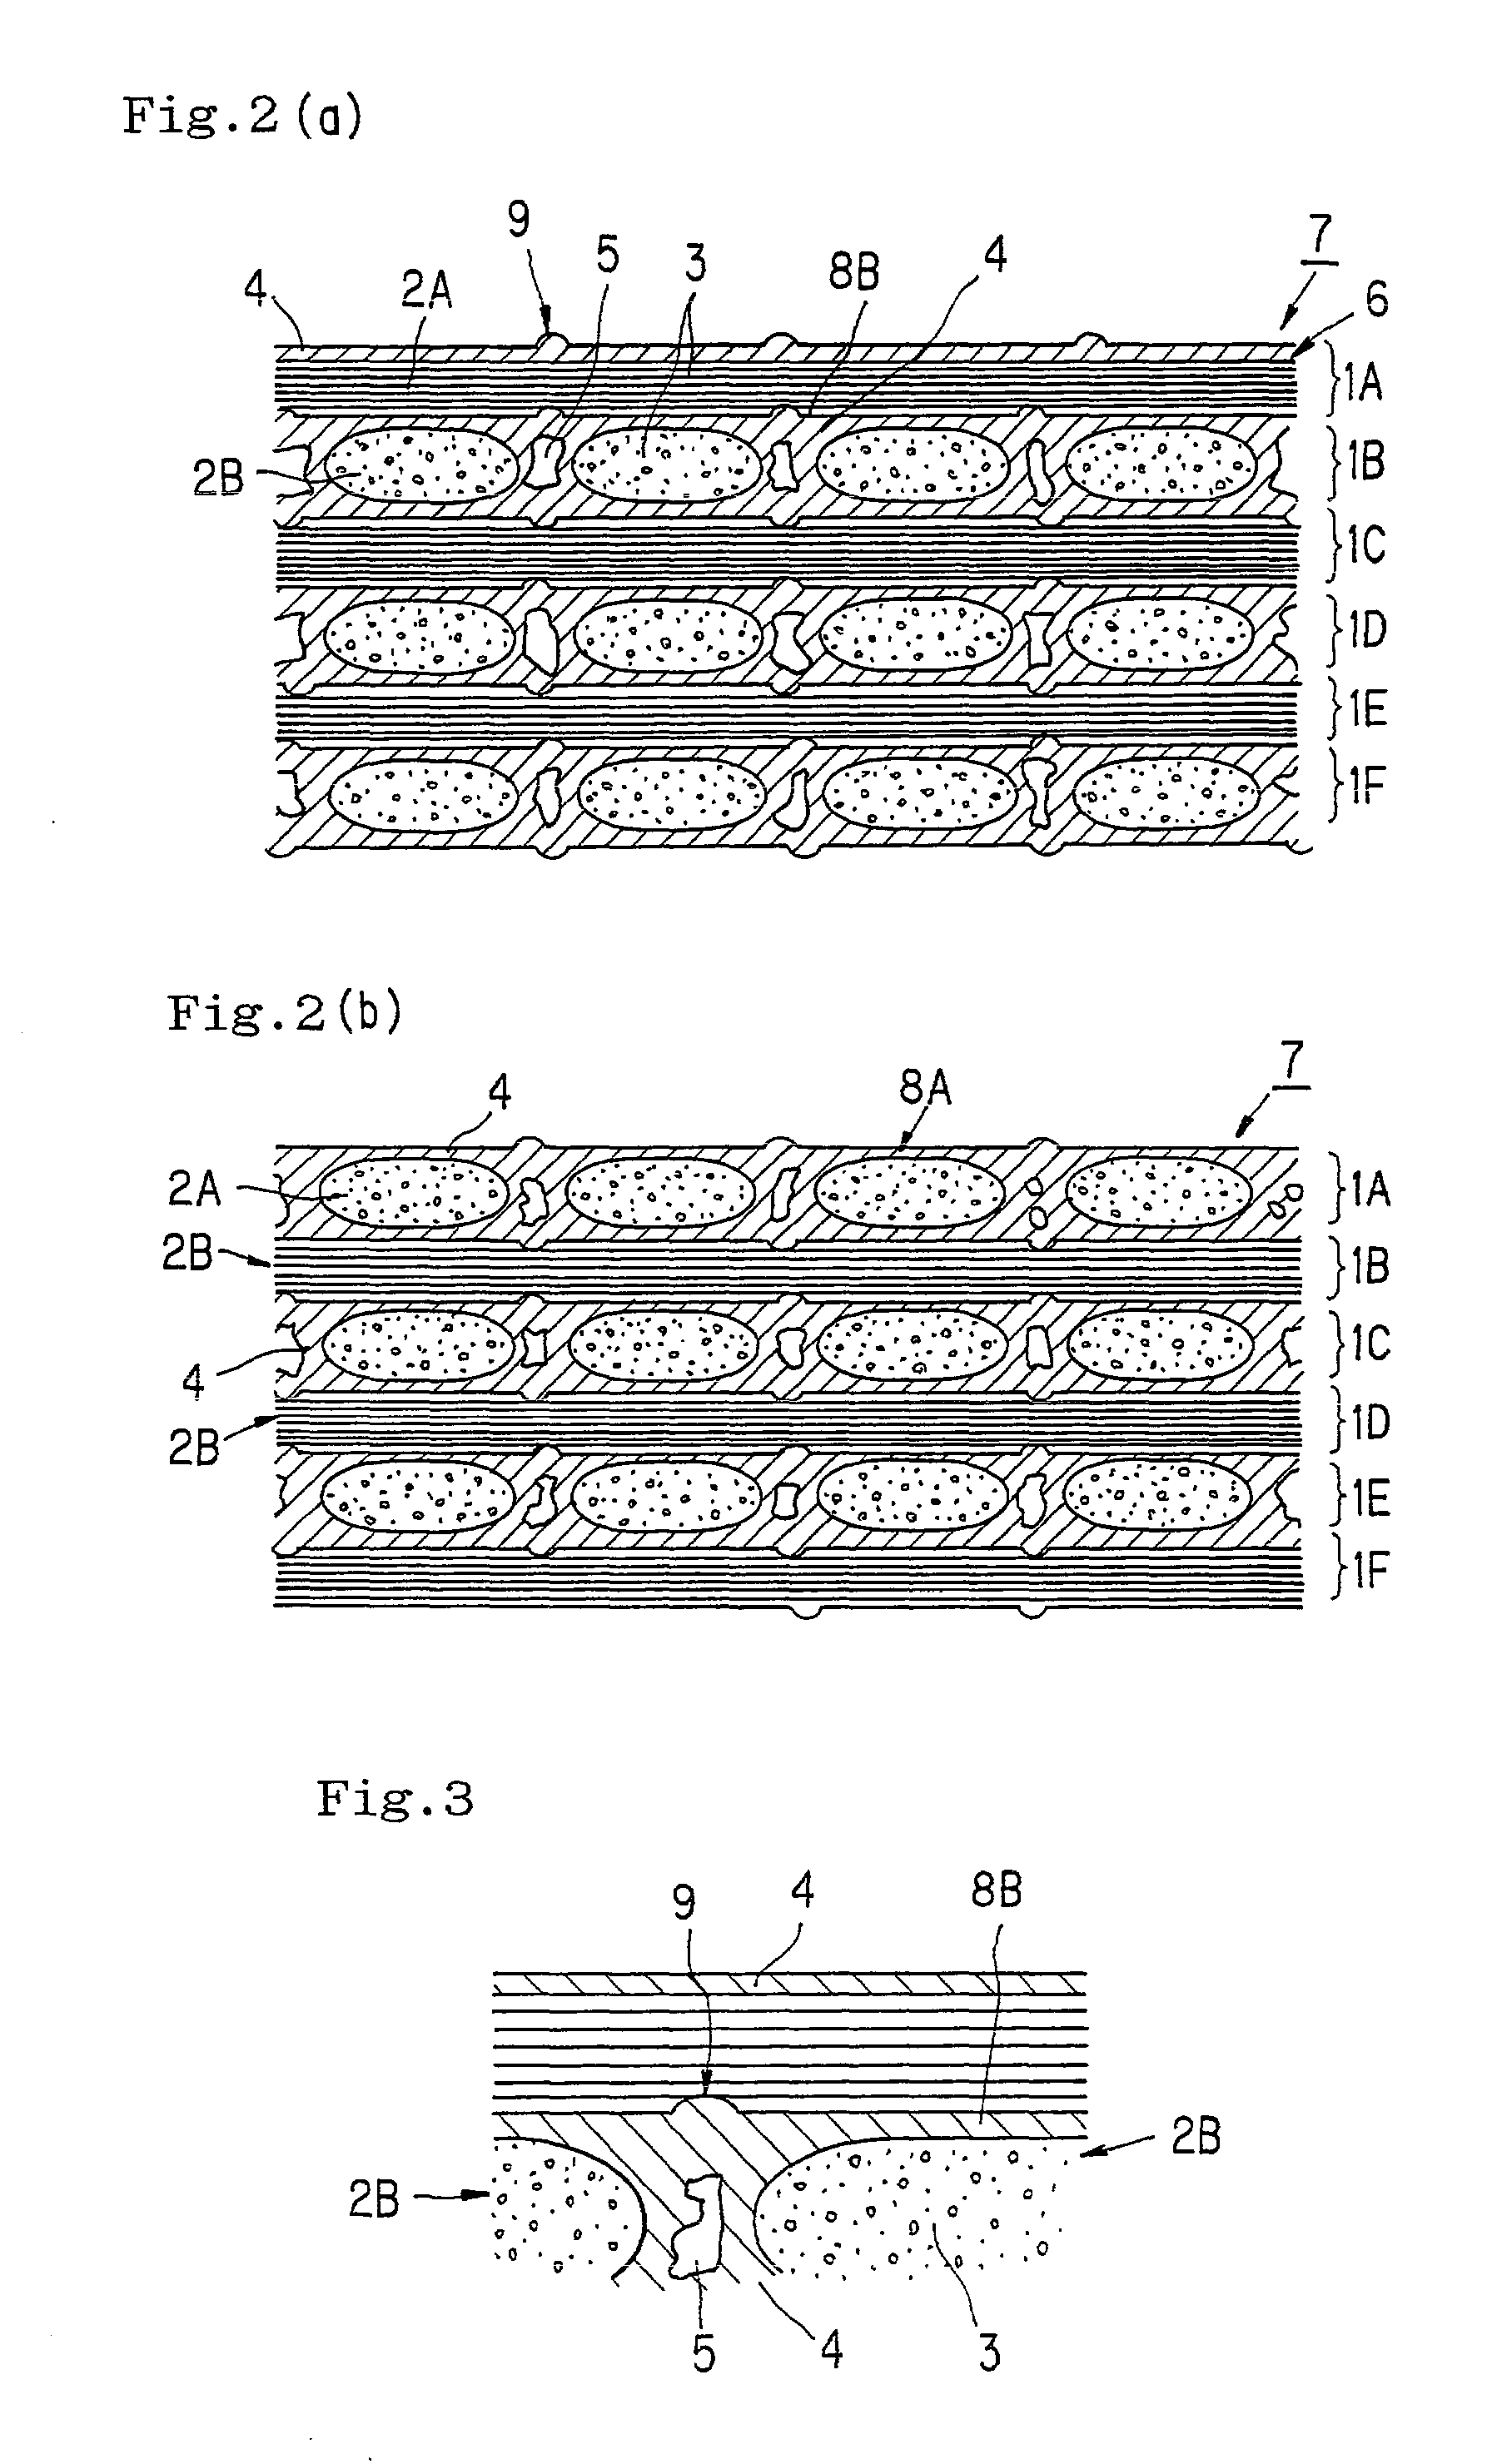 SiC-C/C composite material, uses thereof, and method for producing the same